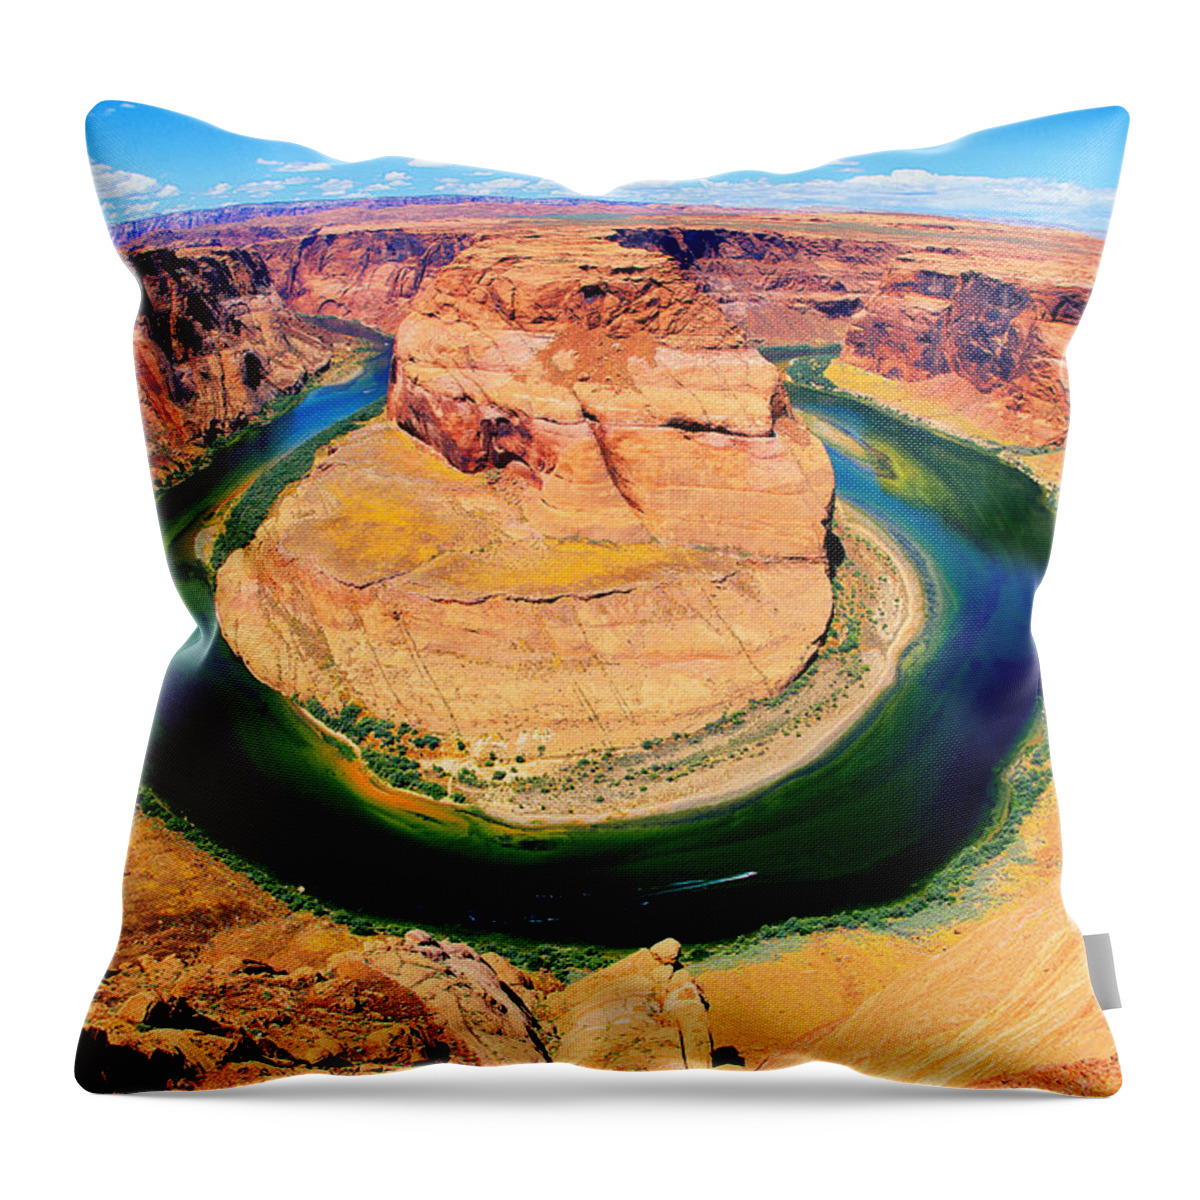 Arizona Landscape Throw Pillow featuring the photograph Horseshoe Bend by Frank Houck